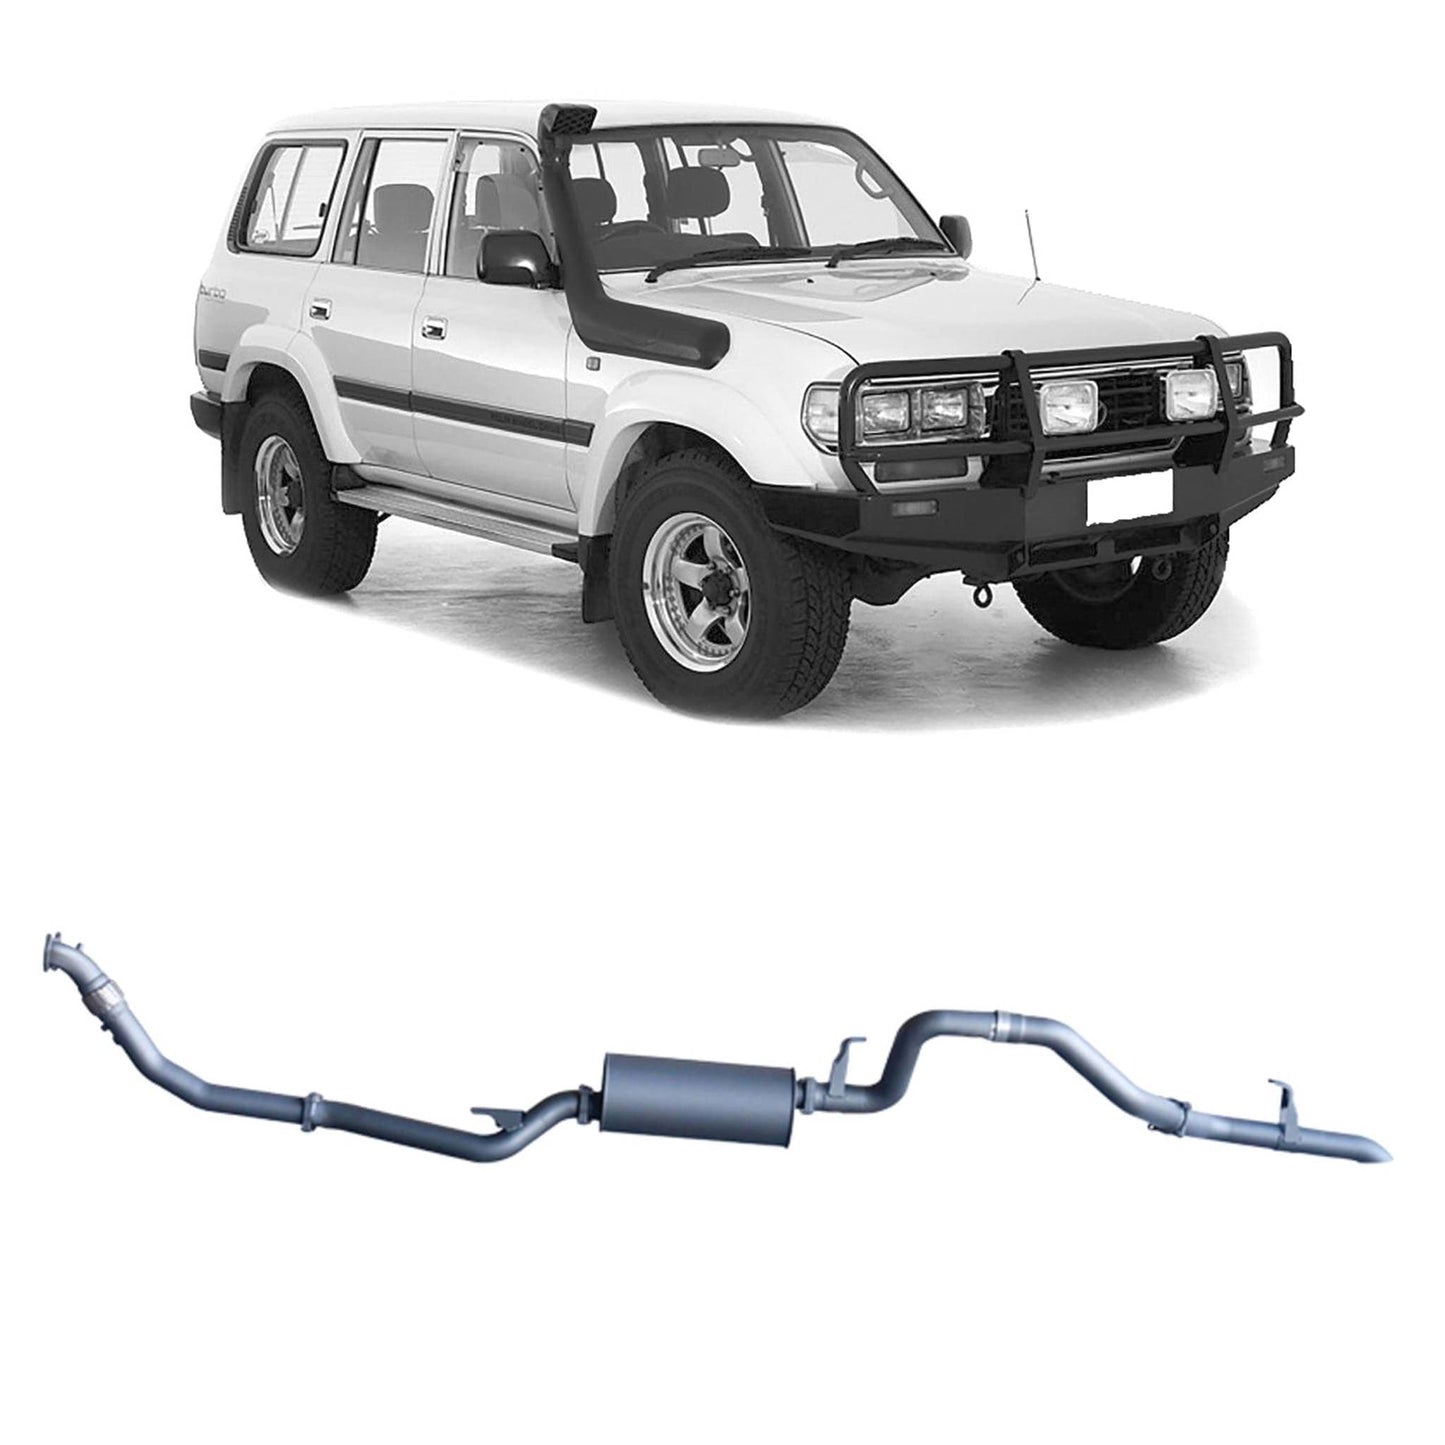 Redback Extreme Duty Exhaust for Toyota Landcruiser 80 Series Wagon 4.2L 1HZ (01/1990 - 02/1998)